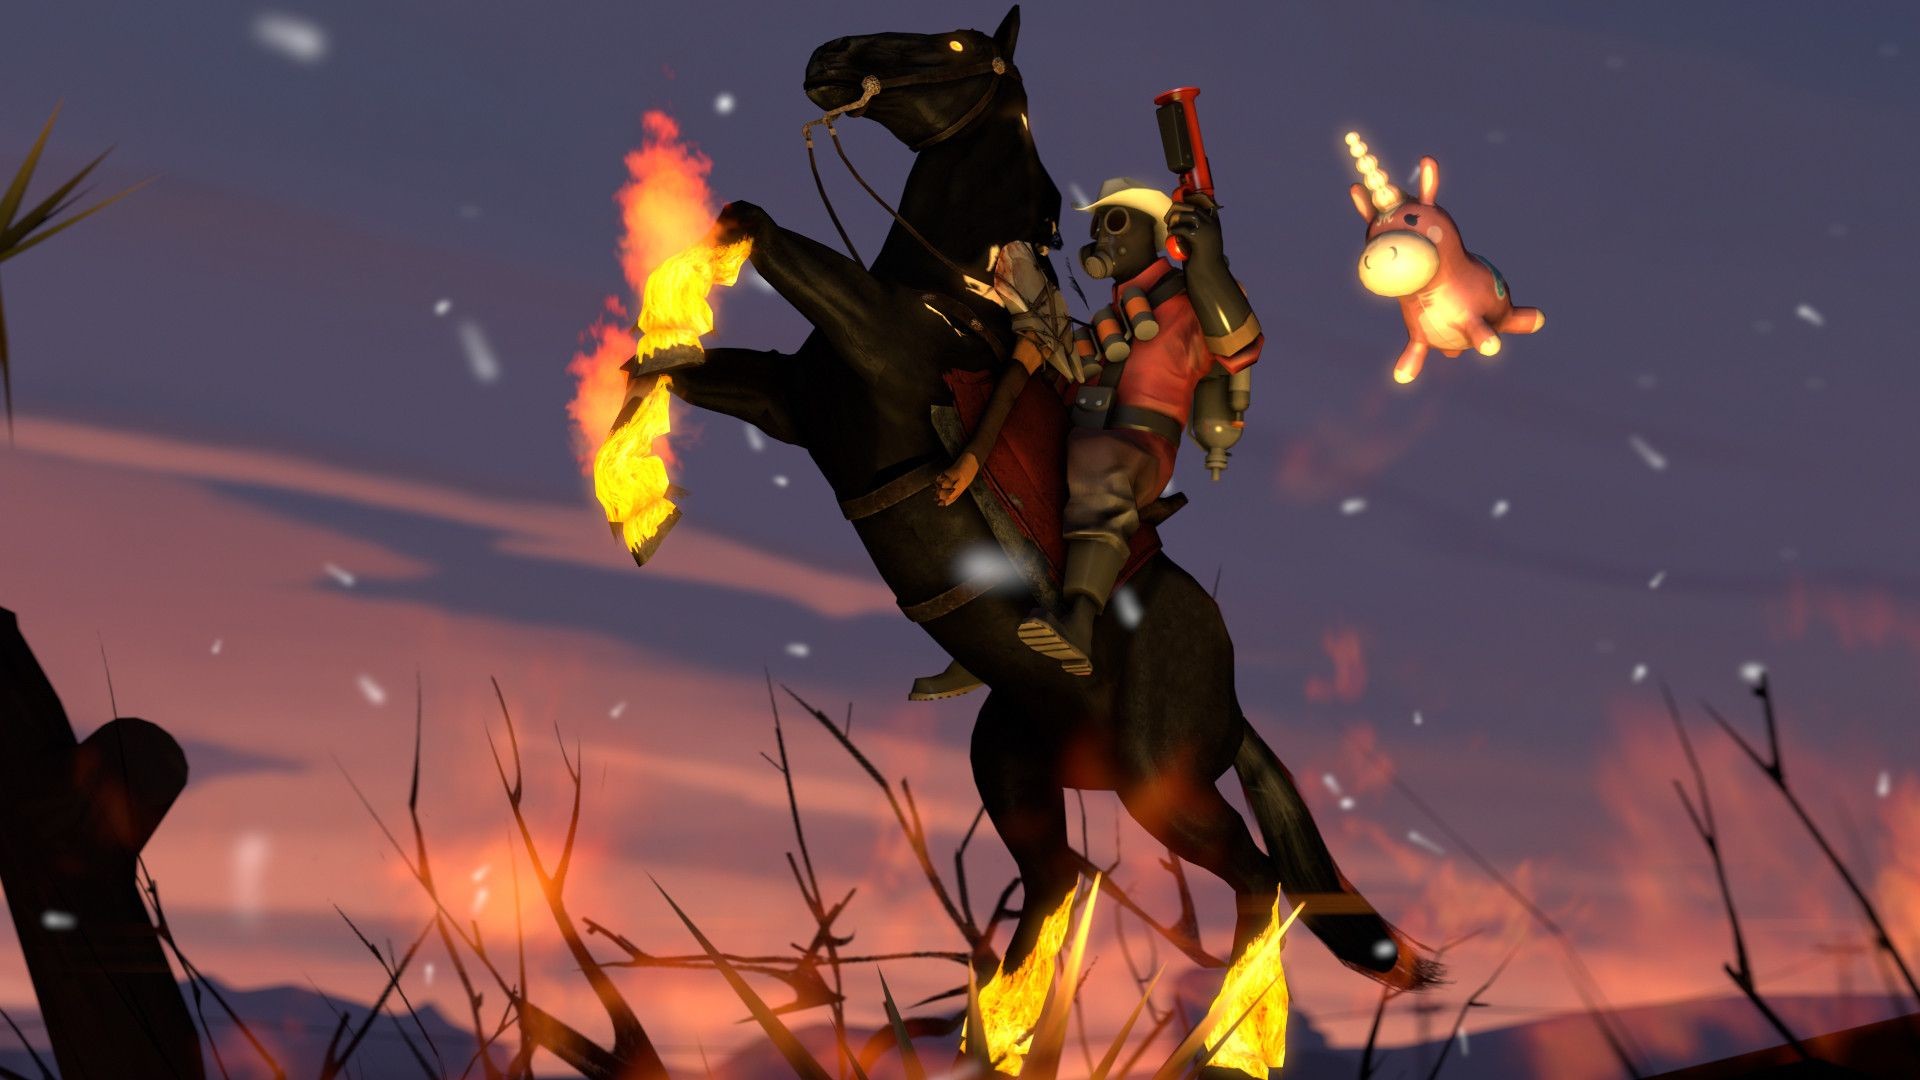 1920x1080 8 Awesome and Cute Pyro from Team Fortress 2 Images and Wallpapers .